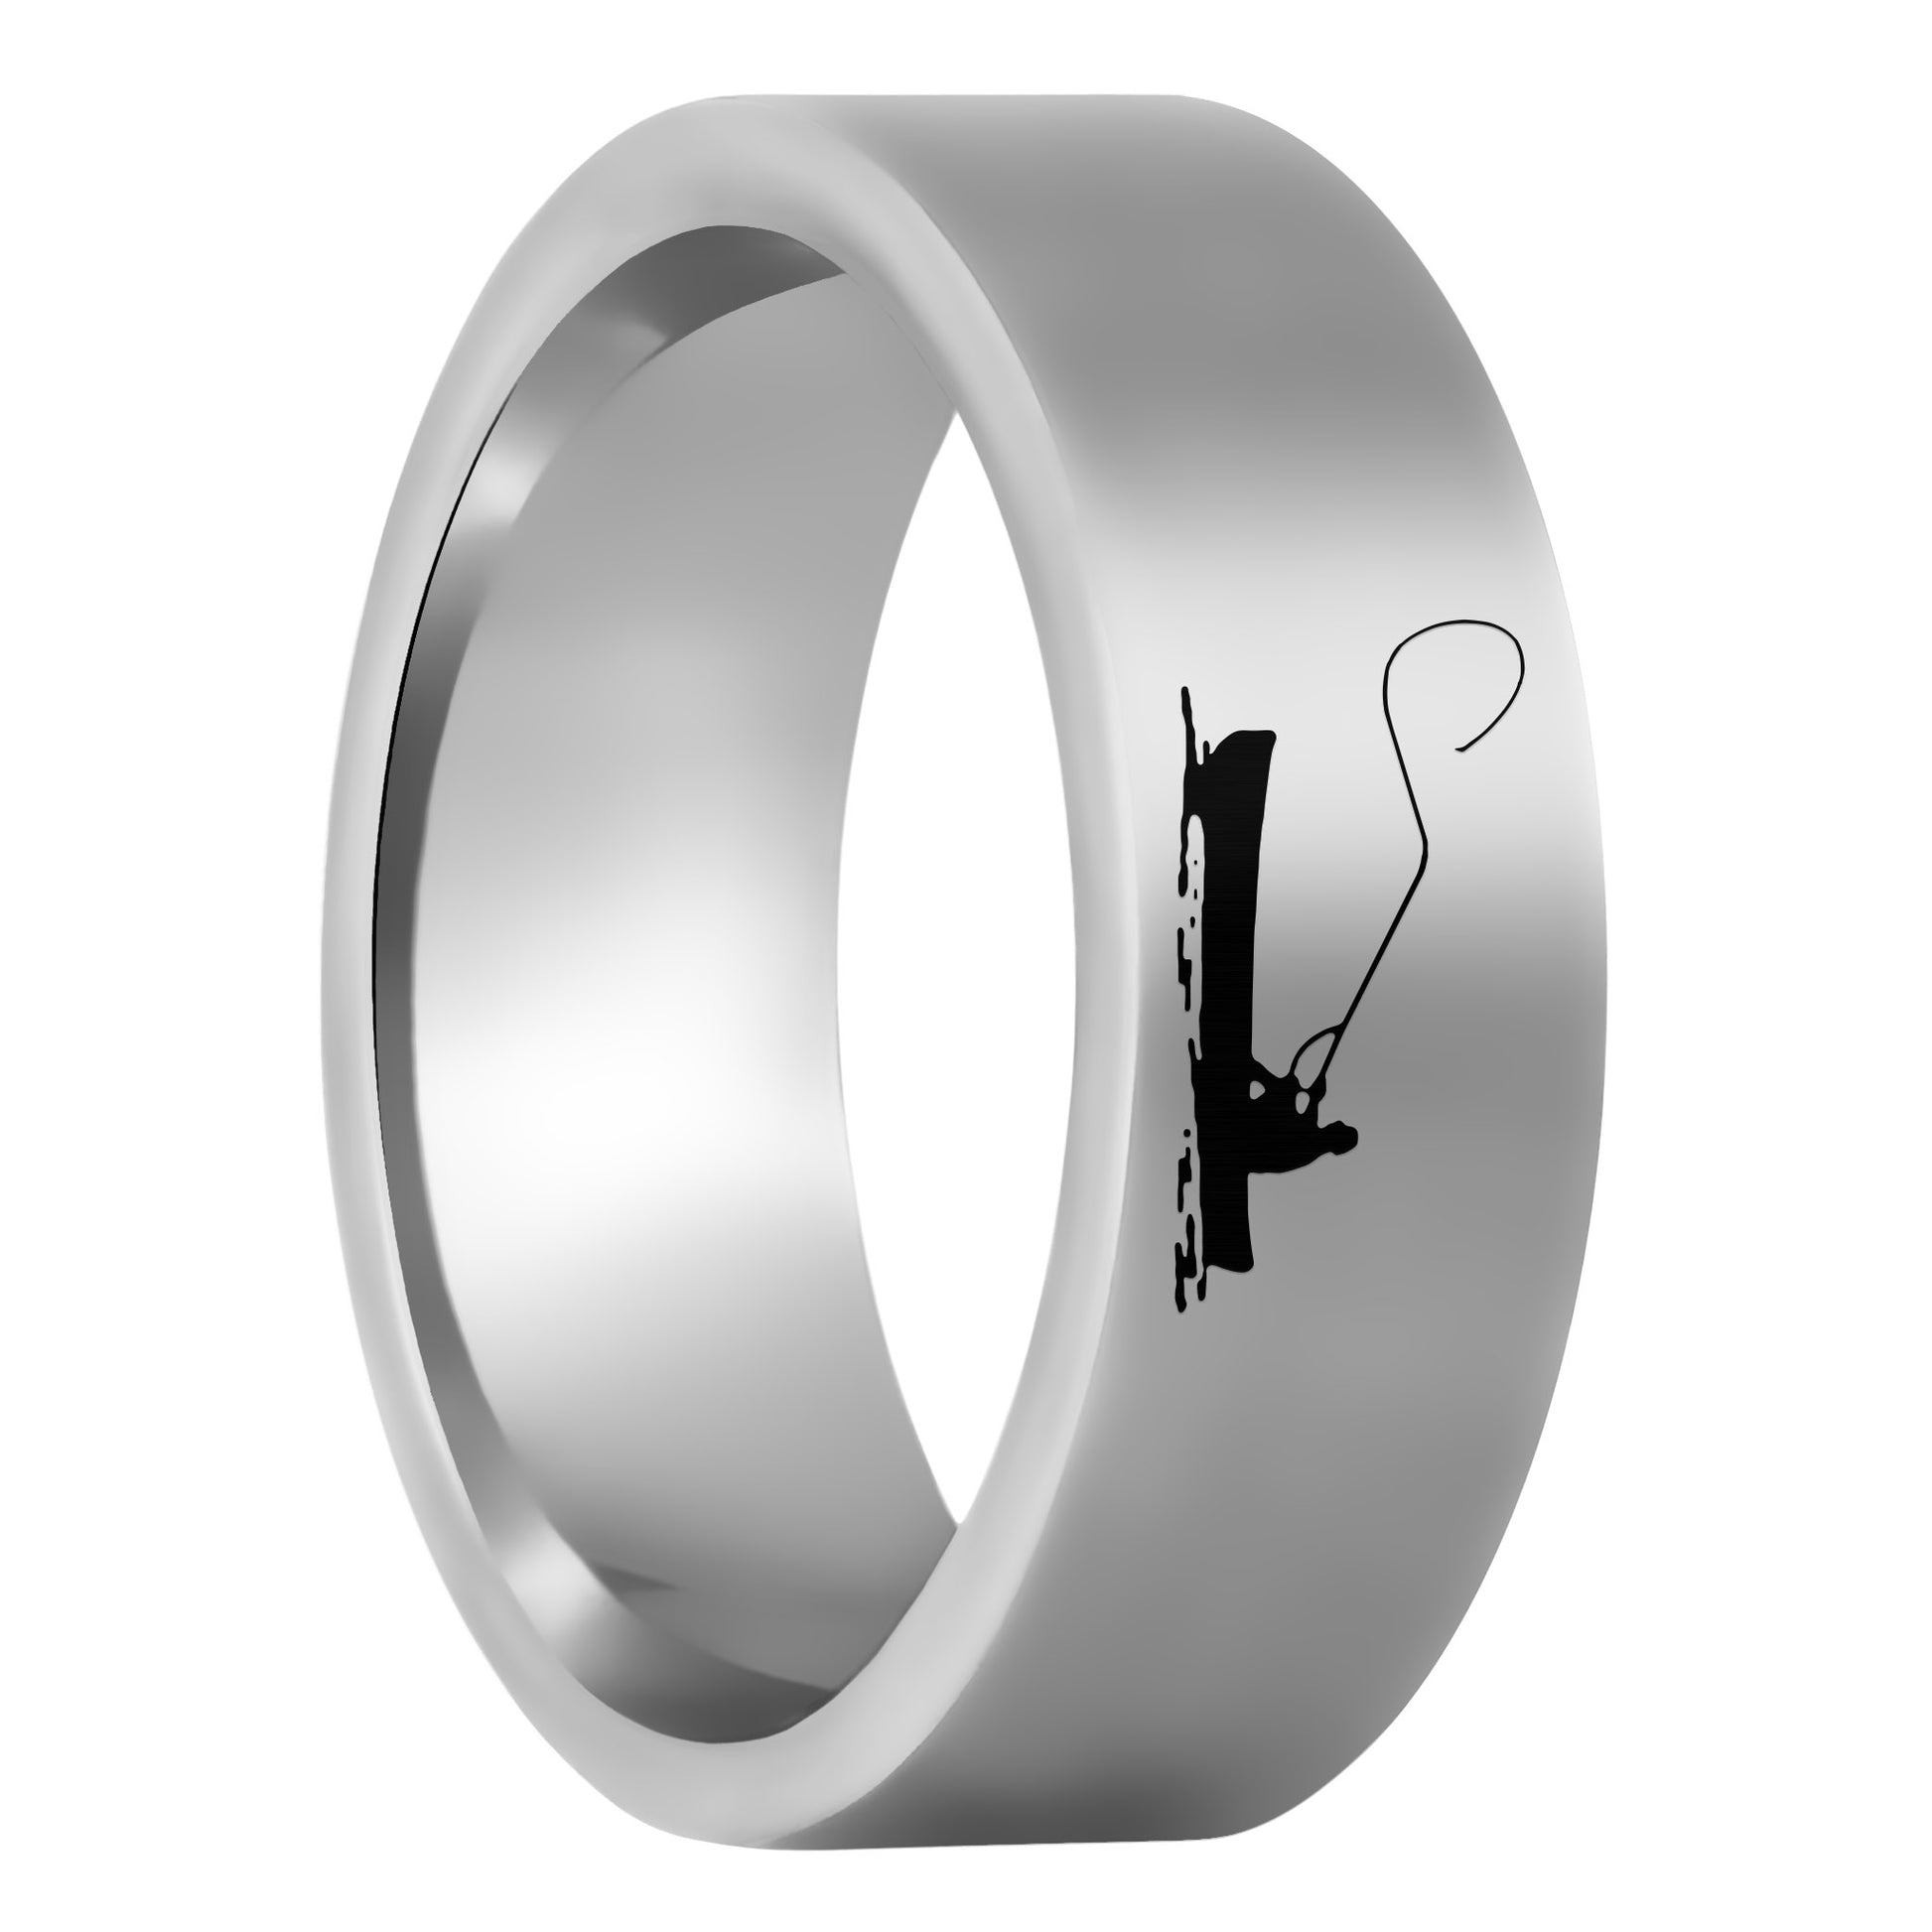 One Fisherman Boat Scene Tungsten Men's Wedding Band displayed on a plain white background